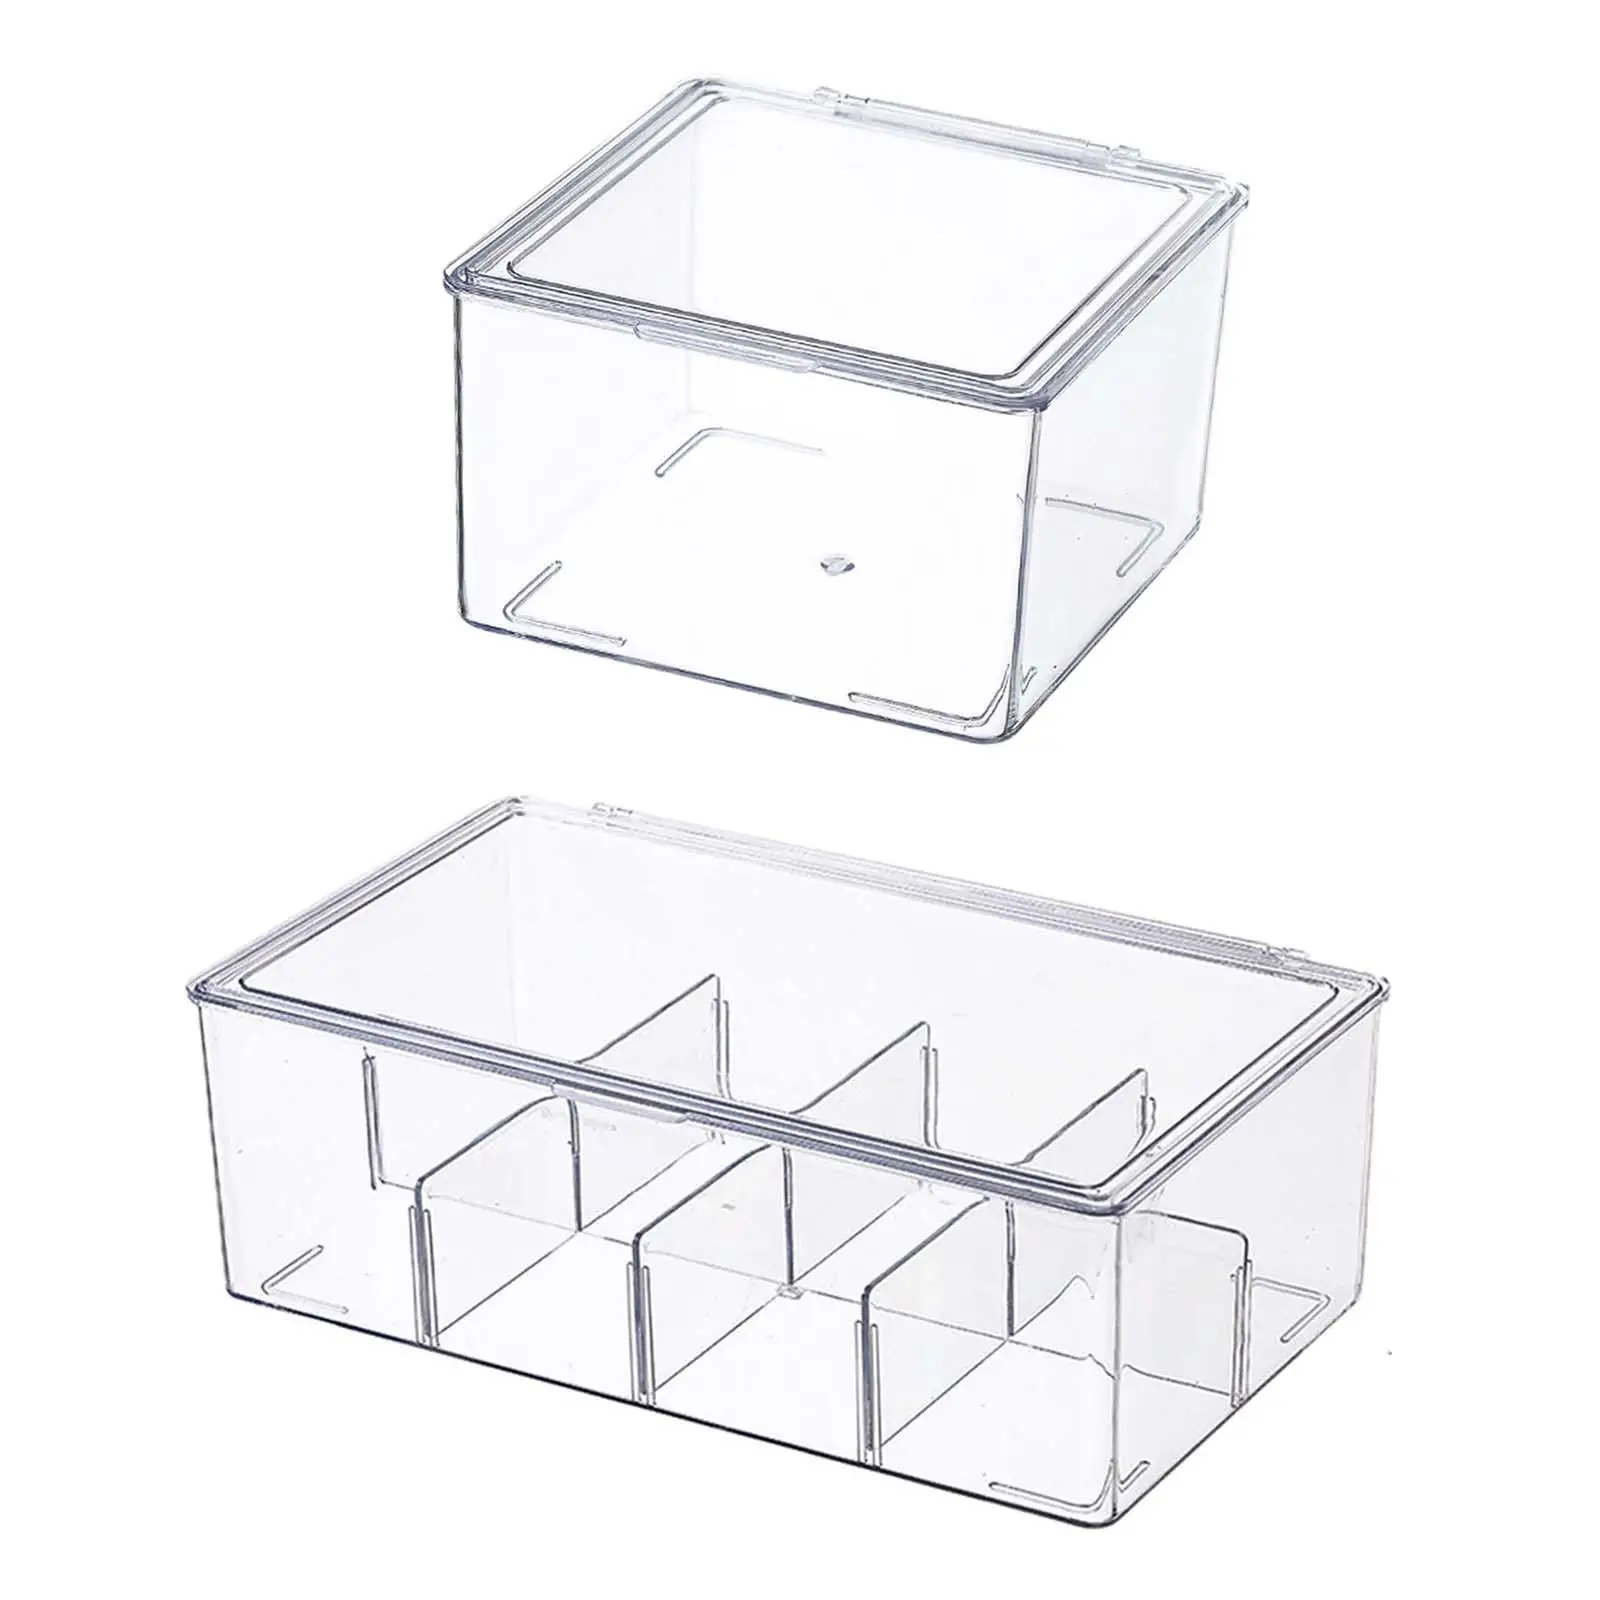 Tea Bags Storage Container Multi Functional for Cabinet Countertop